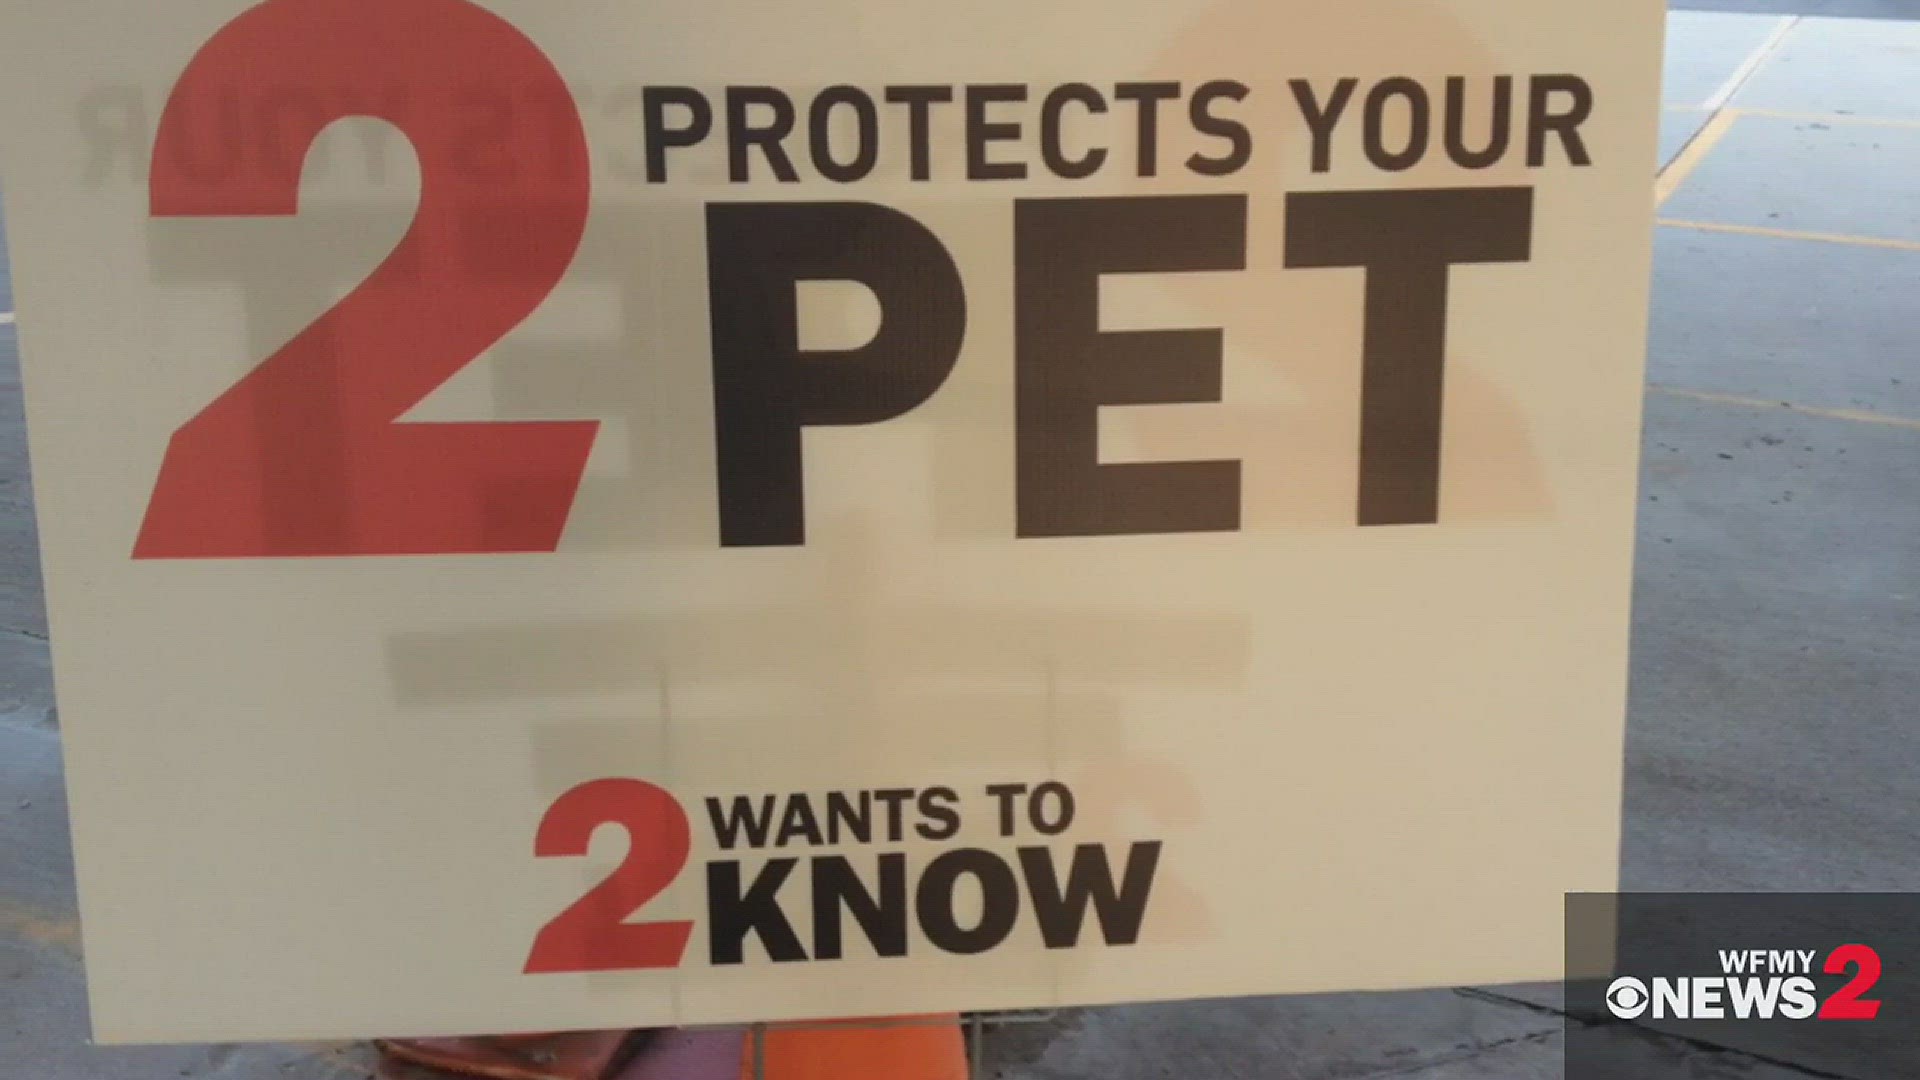 Pets Are Family At The 2 Protects Your Pet Event